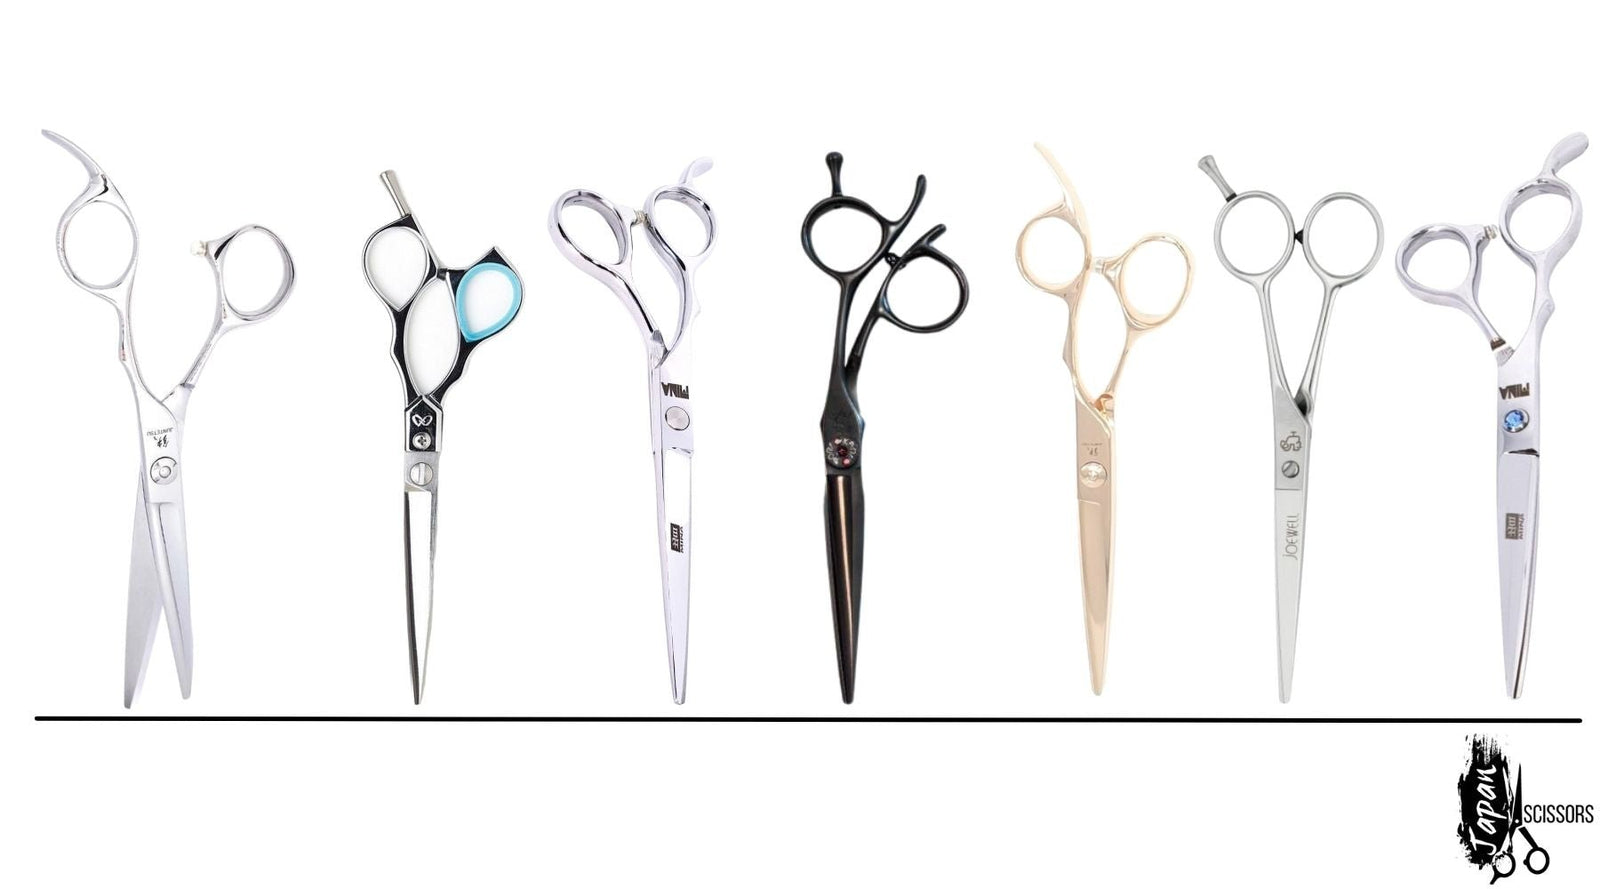 Different Types Of Hairdressing Scissors  Types Of Hair Scissors - Scissor  Hub Australia